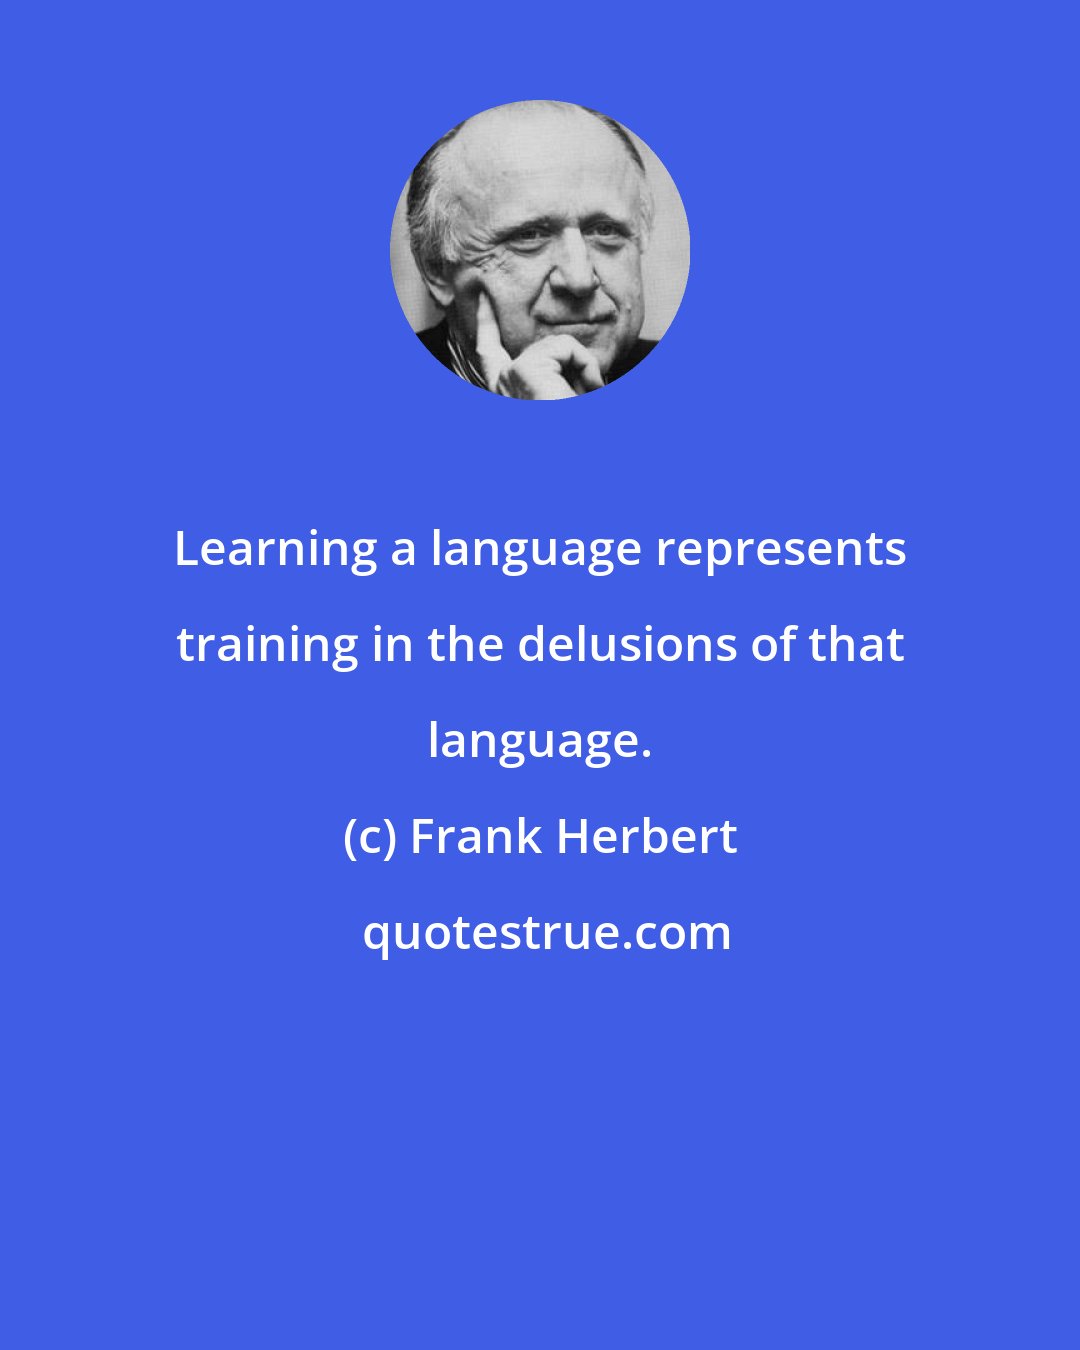 Frank Herbert: Learning a language represents training in the delusions of that language.